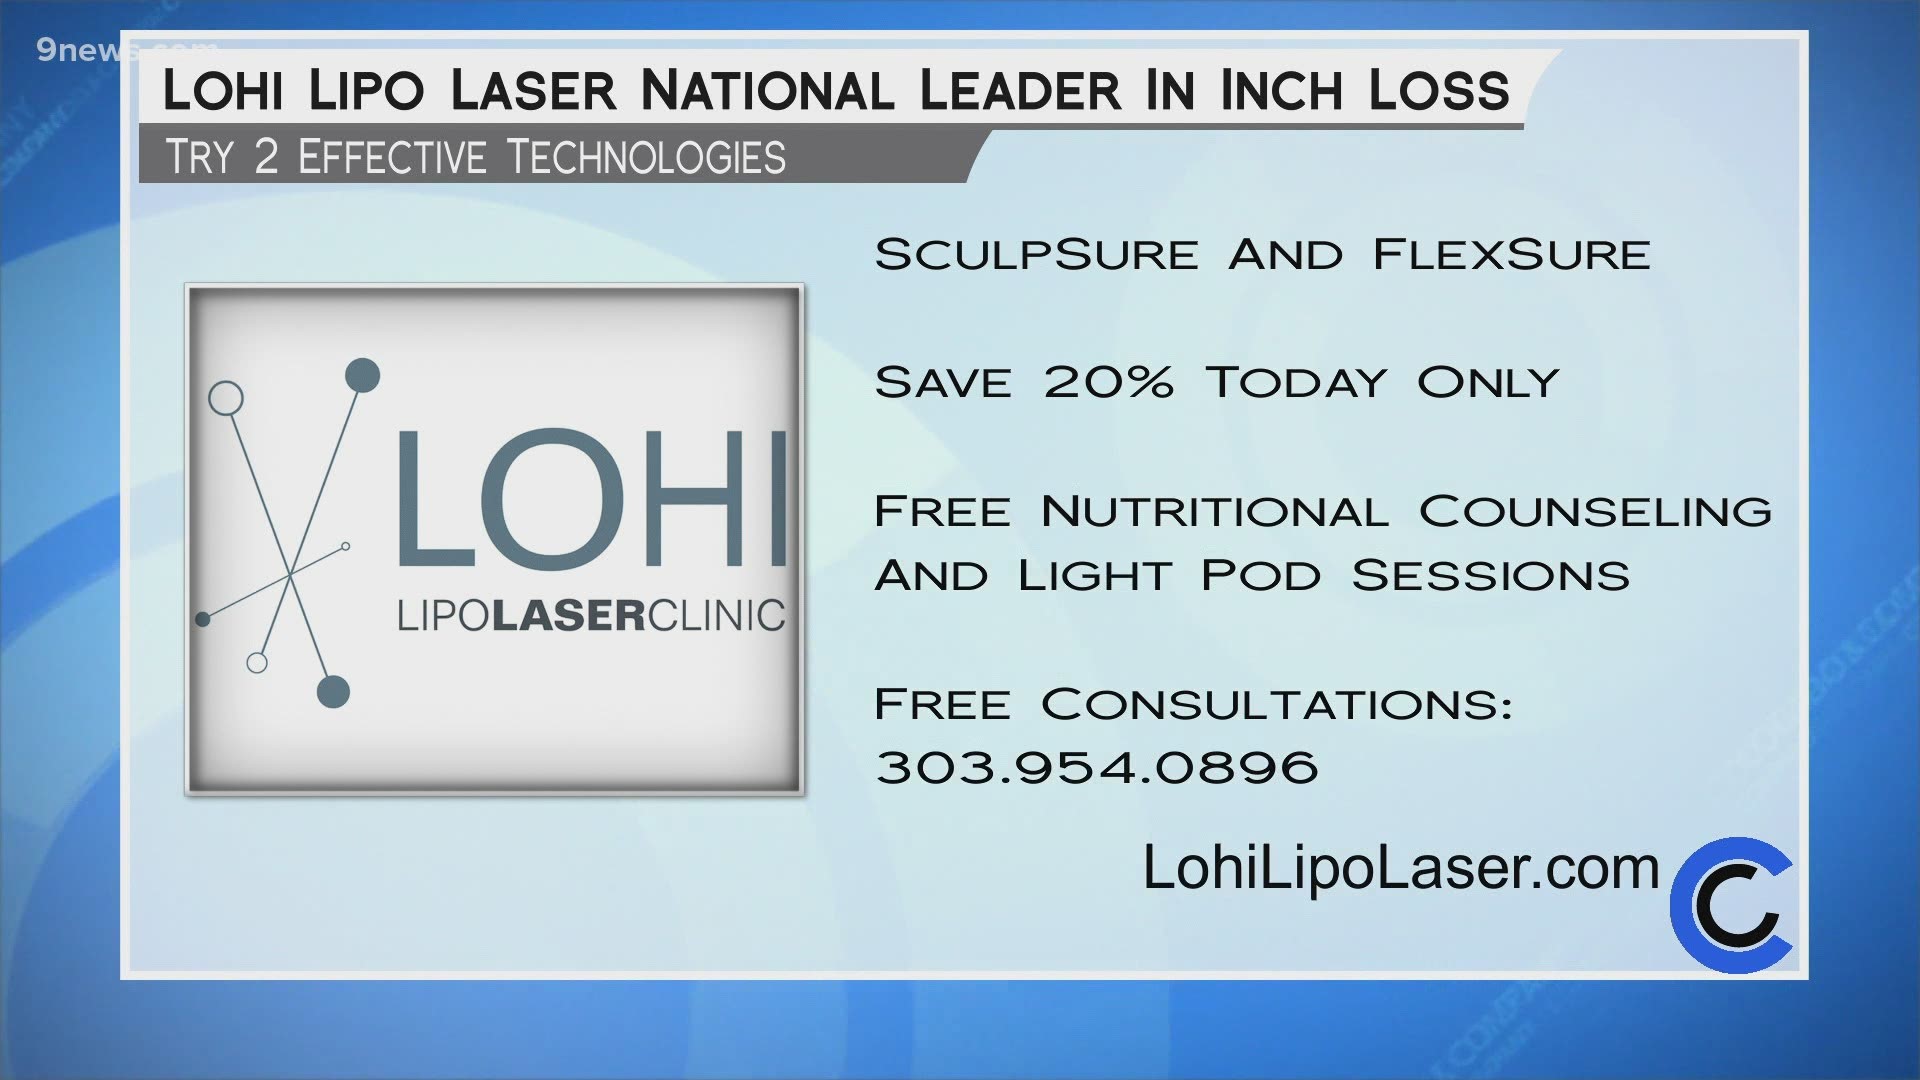 Call 303.954.0896 or visit LohiLipoLaser.com to get started with SculpSure and FlexSure. You can get 20% with free nutritional counseling and light pod sessions!